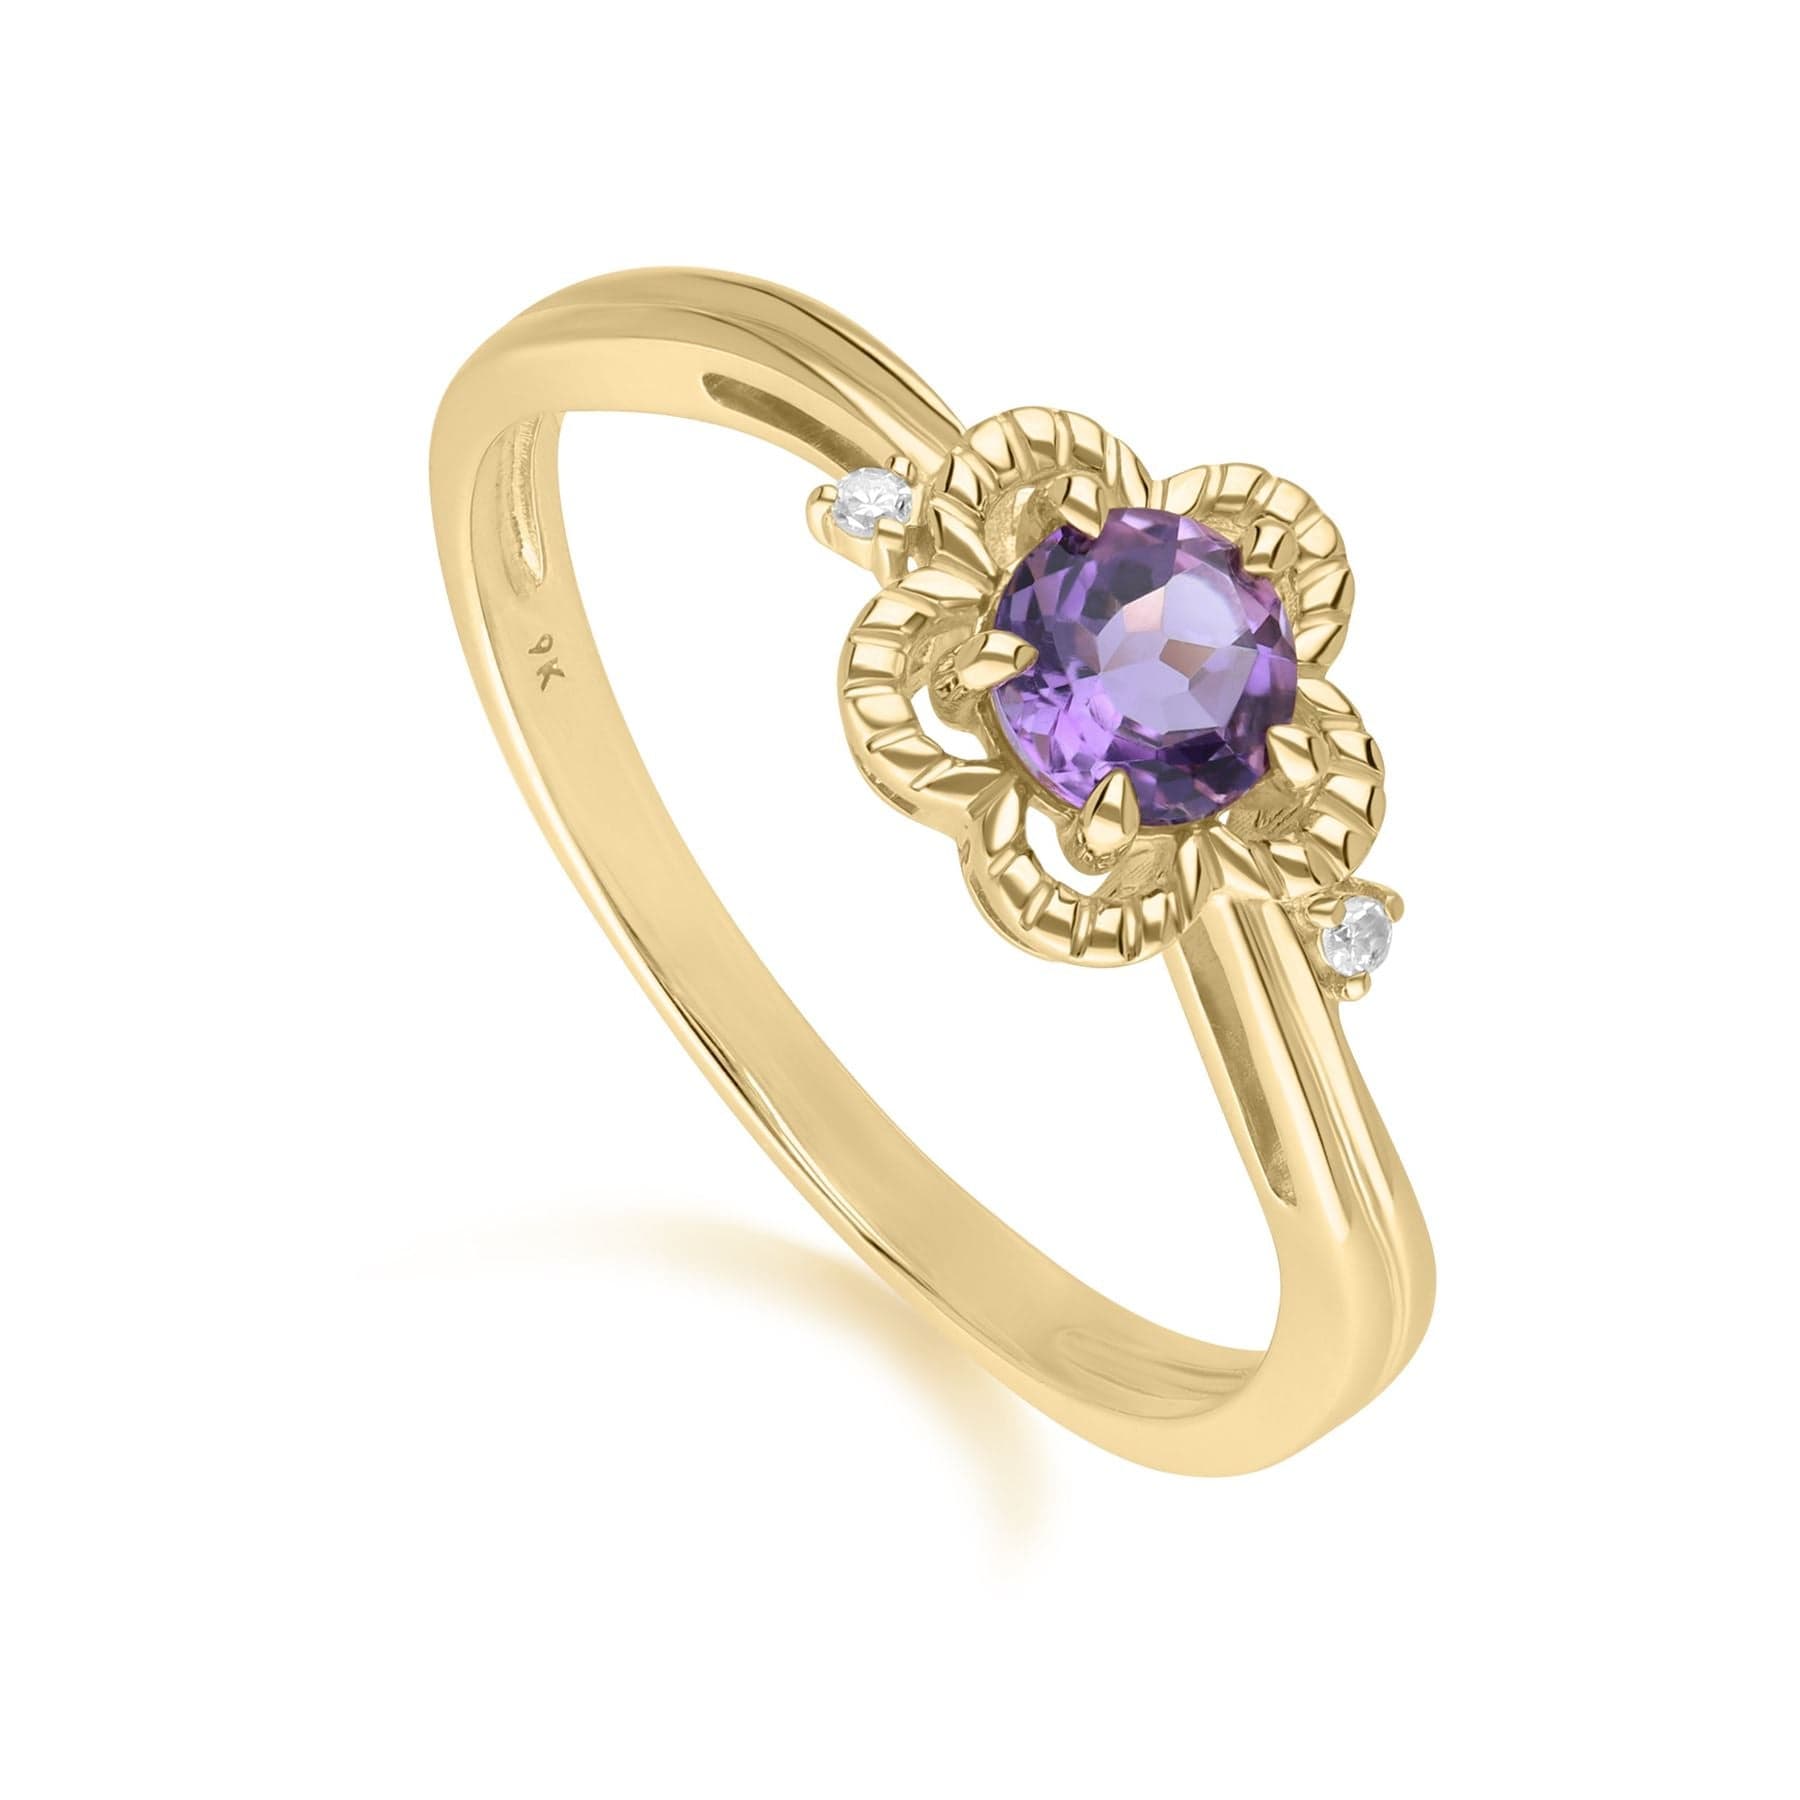 Image of Floral Round Amethyst & Diamond Ring in 9ct Yellow Gold